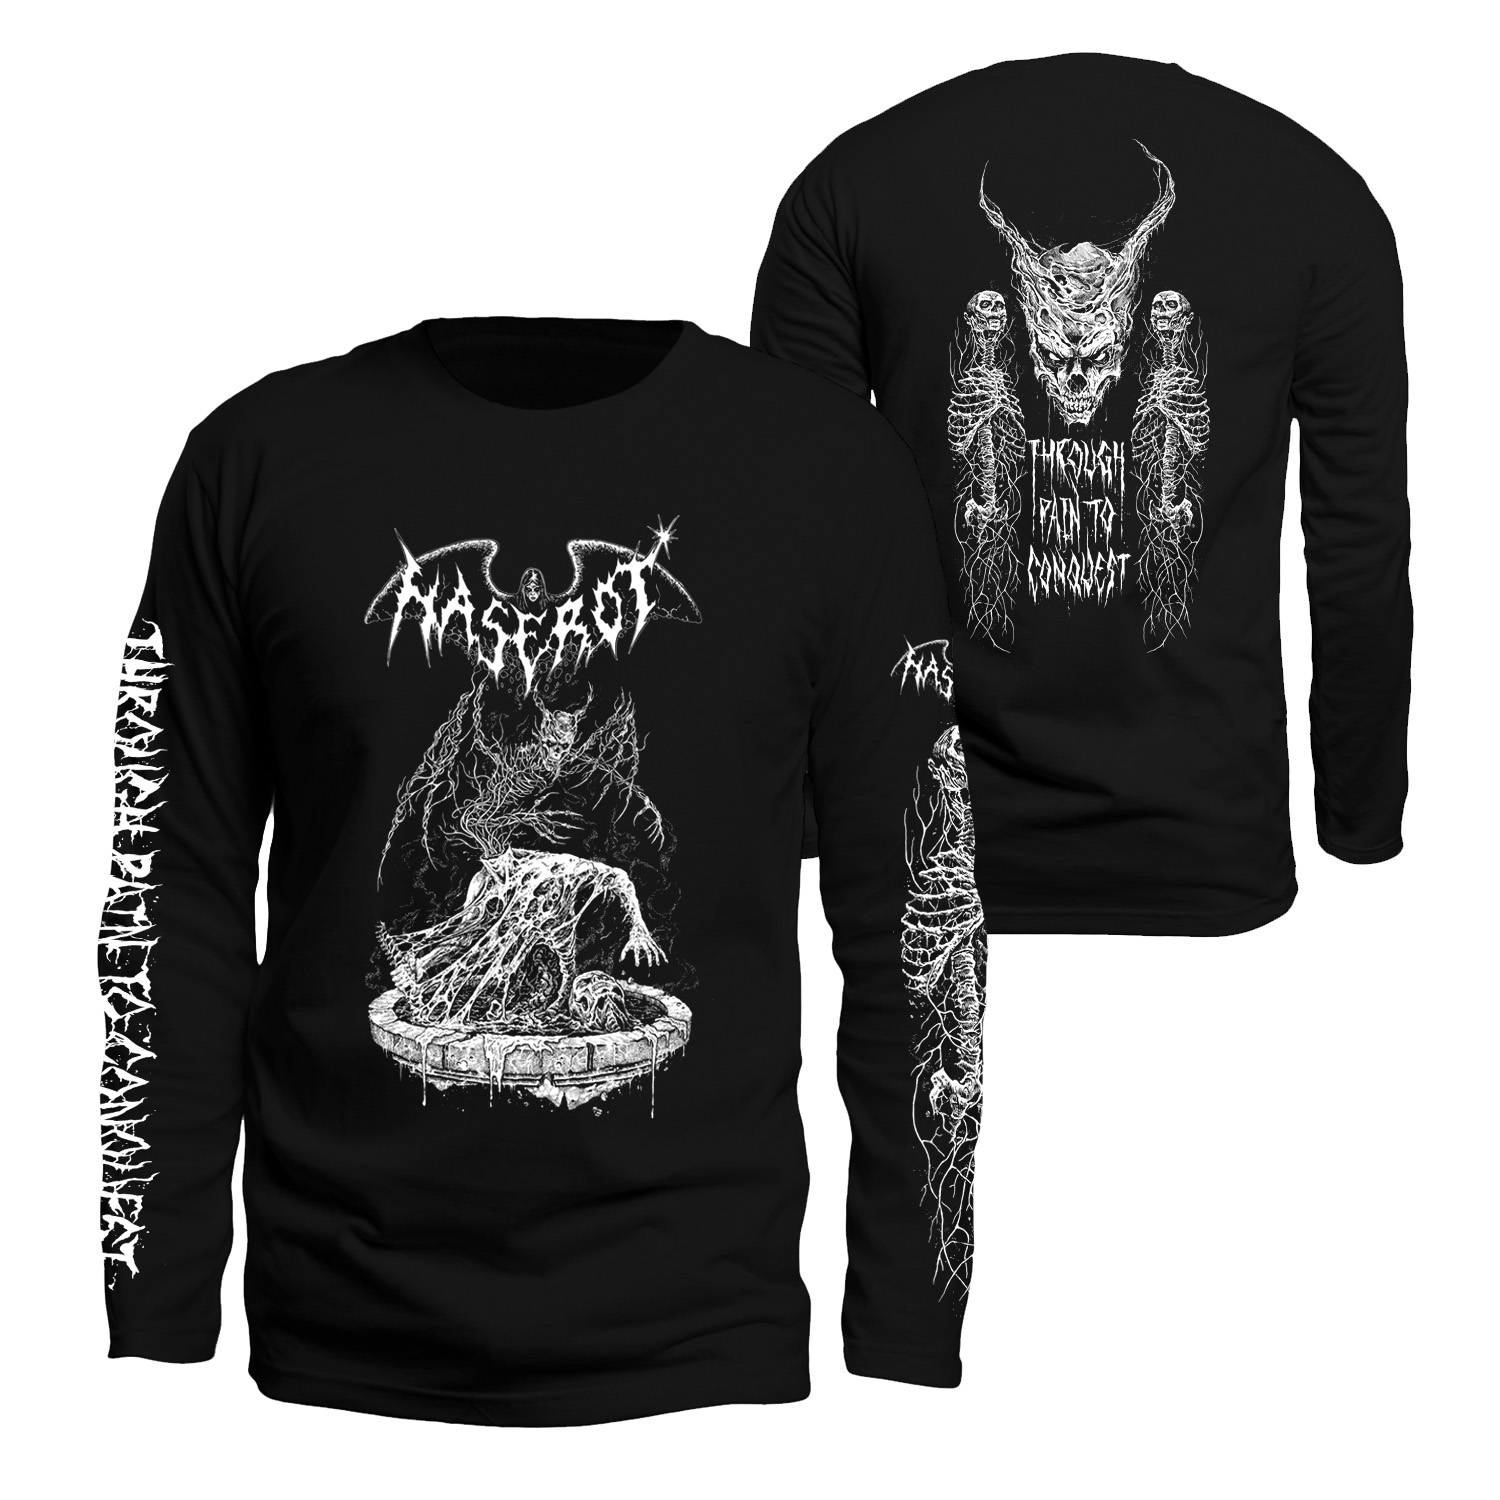 Haserot – Through Pain to Conquest Long Sleeve – Redefining Darkness